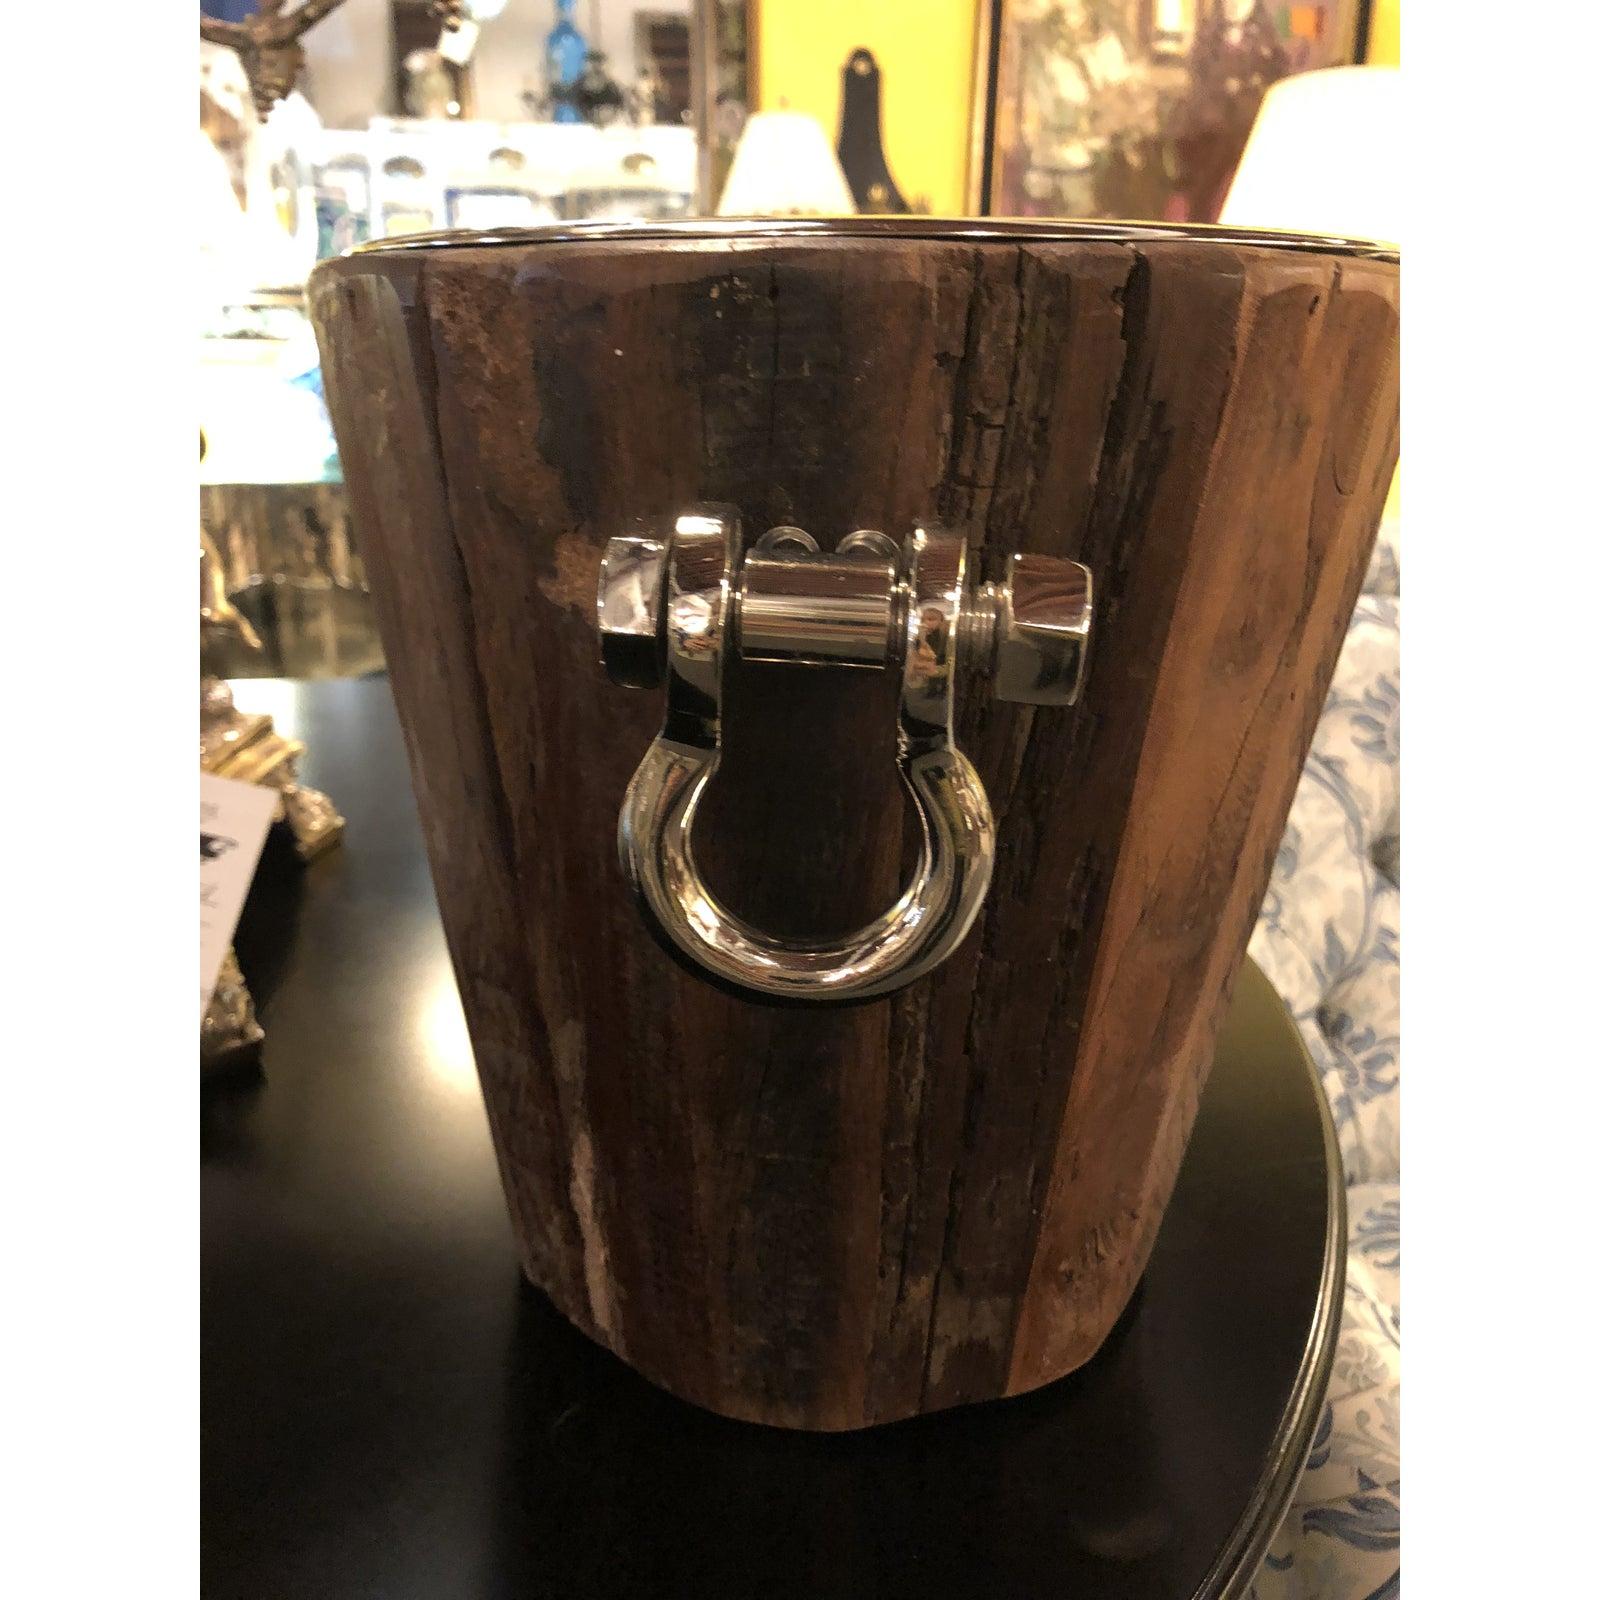 Wooden rustic style ice bucket
An elegant ice bucket with a rustic look. A wonderful decor addition to your bar cart or living room.